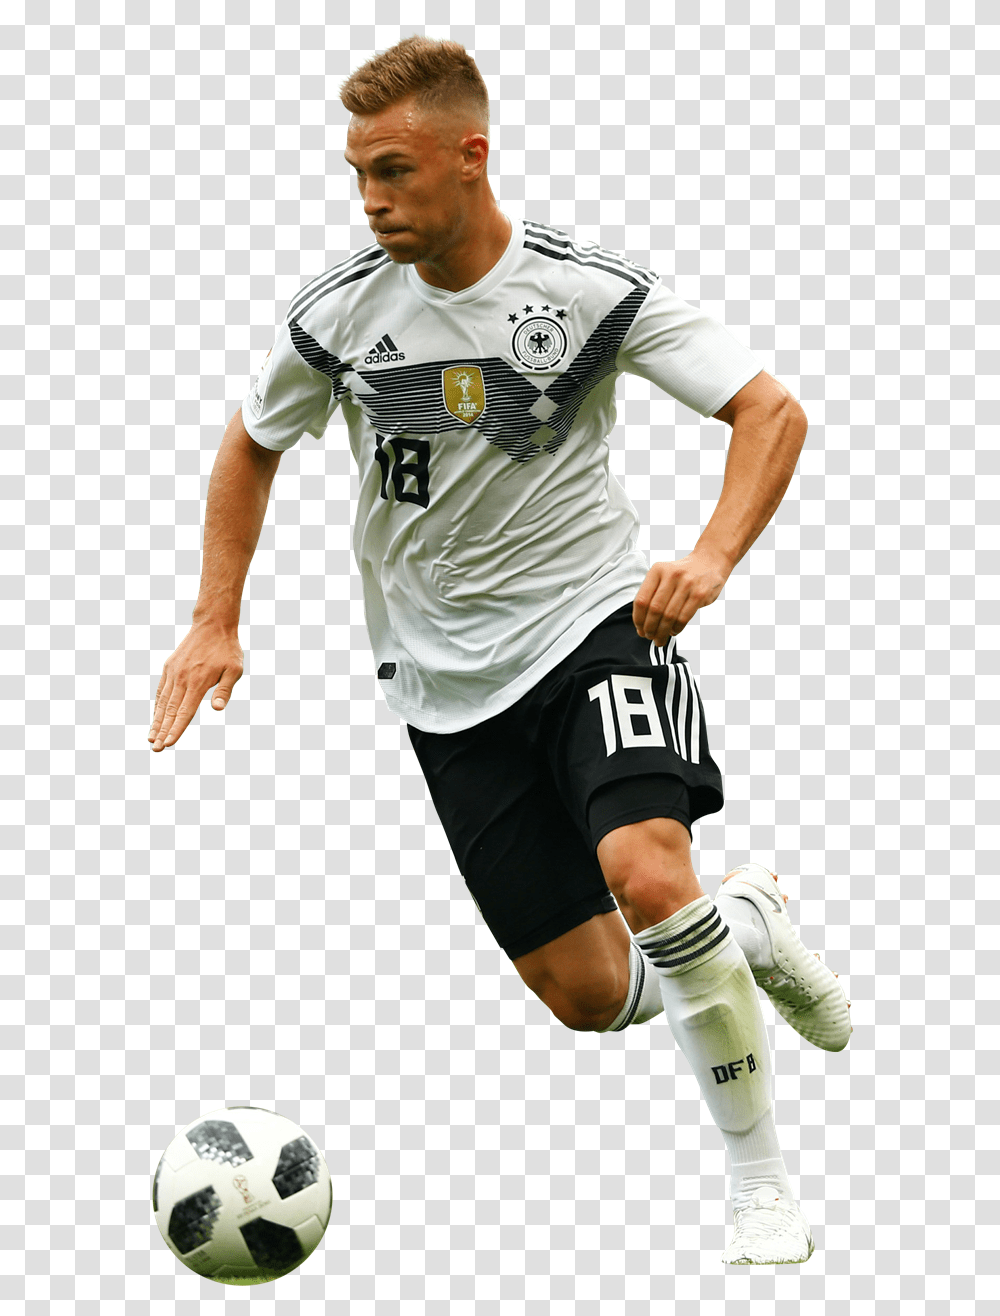 Joshua Kimmich Render Germany View And Download Football Joshua Kimmich Germany, Clothing, Soccer Ball, Team Sport, Person Transparent Png